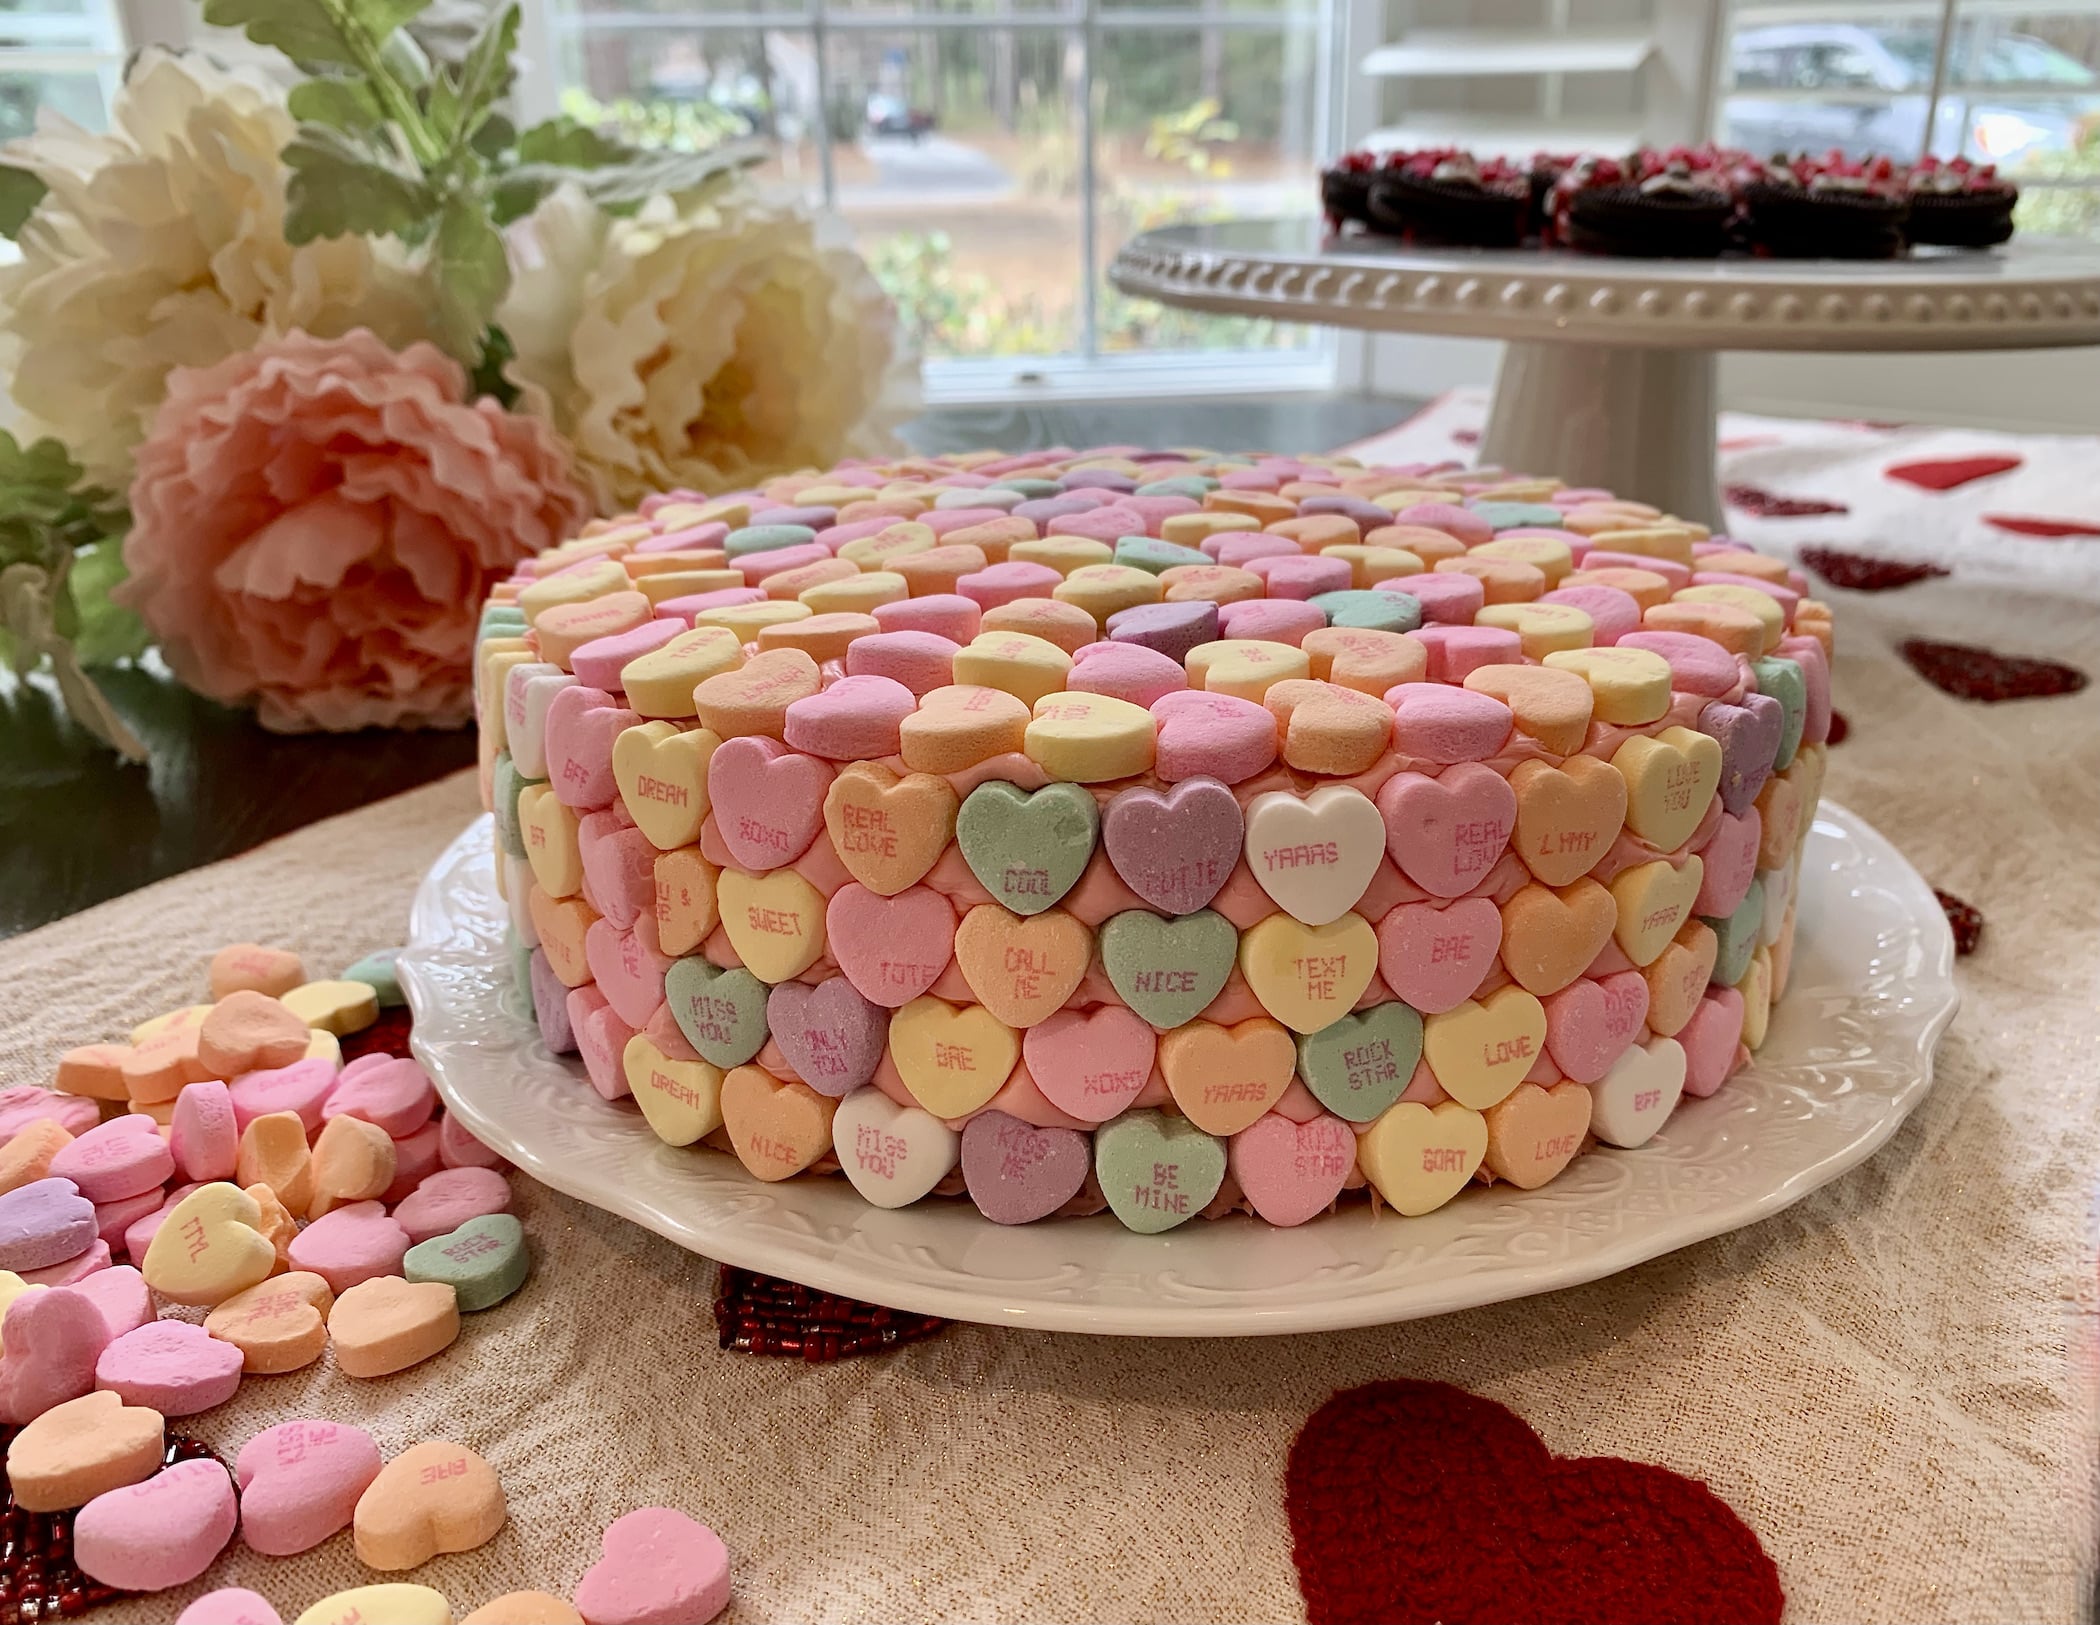 Strawberry or lemon cake/frosting garnished with conversation heart candies.